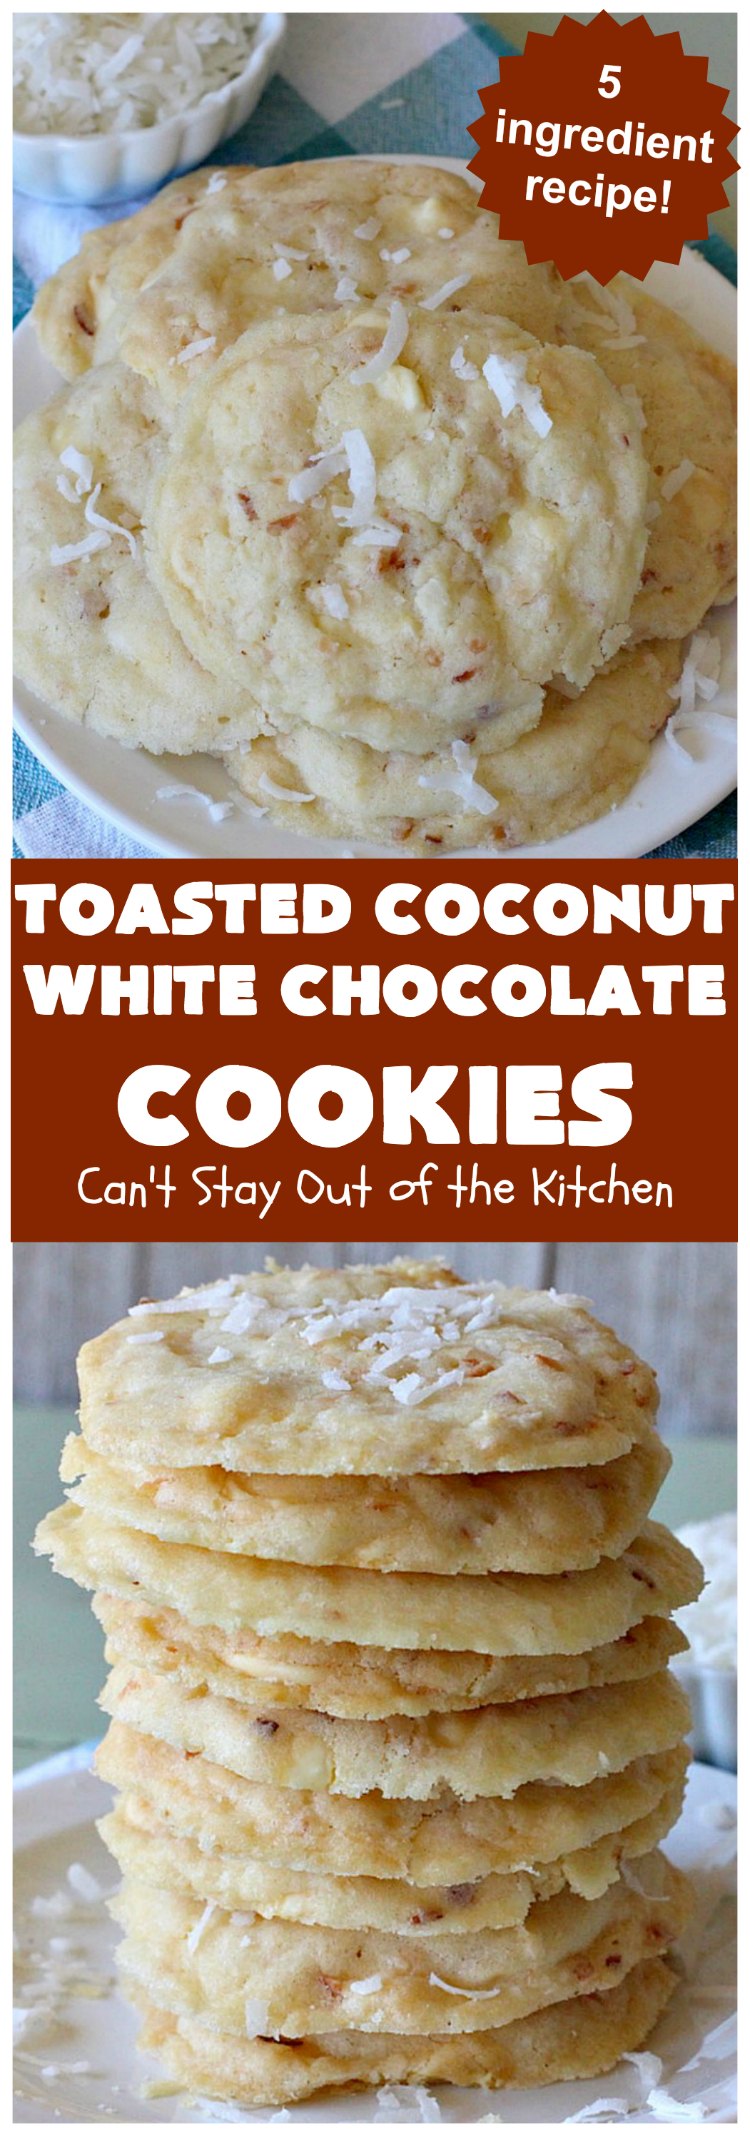 Toasted Coconut White Chocolate Cookies | Can't Stay Out of the Kitchen